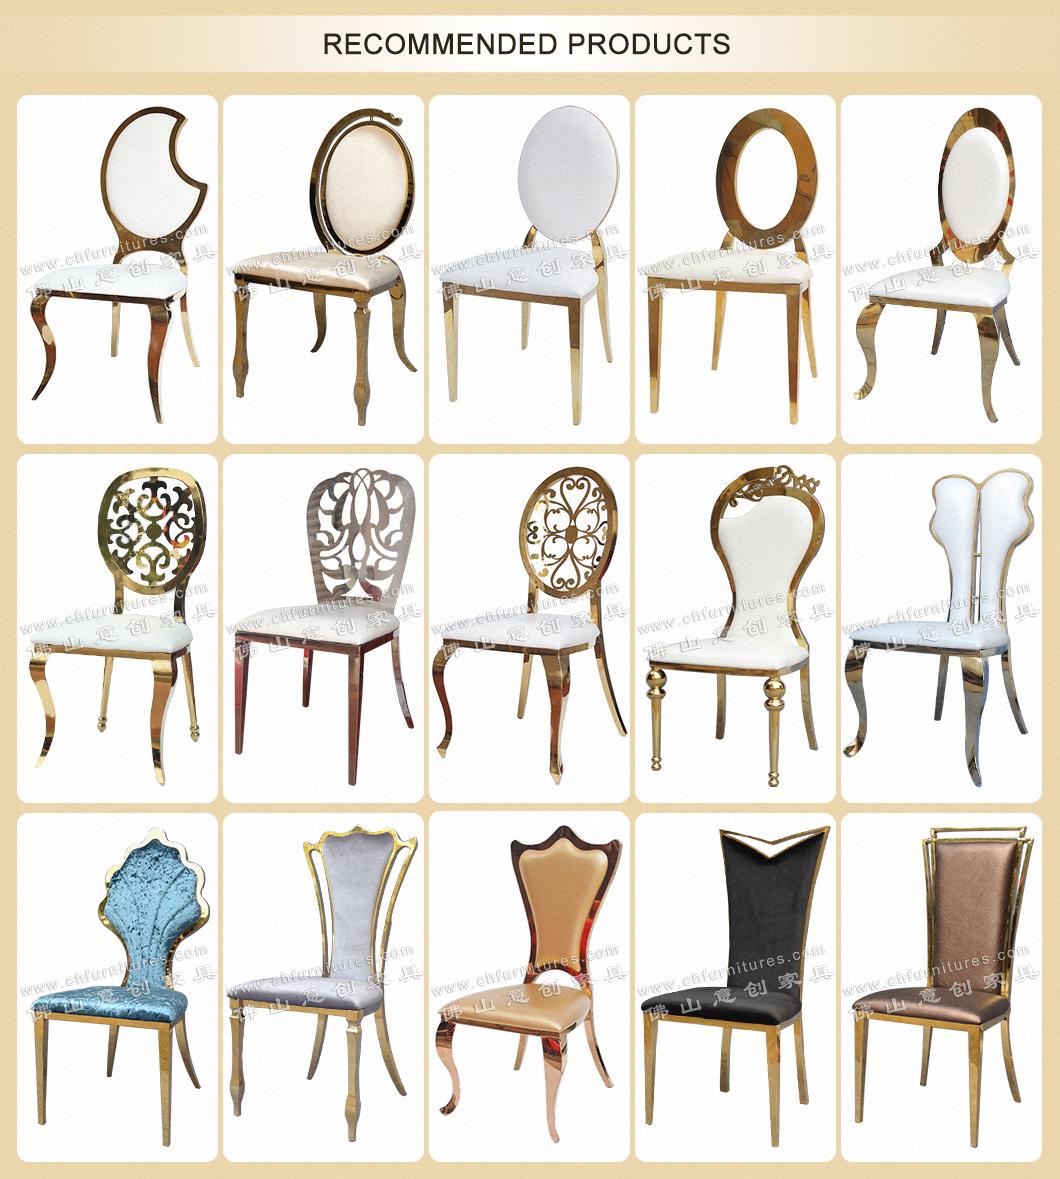 Ycx-Ss55 New Design Stainless Steel Oval Back Brown and Gold Chairs